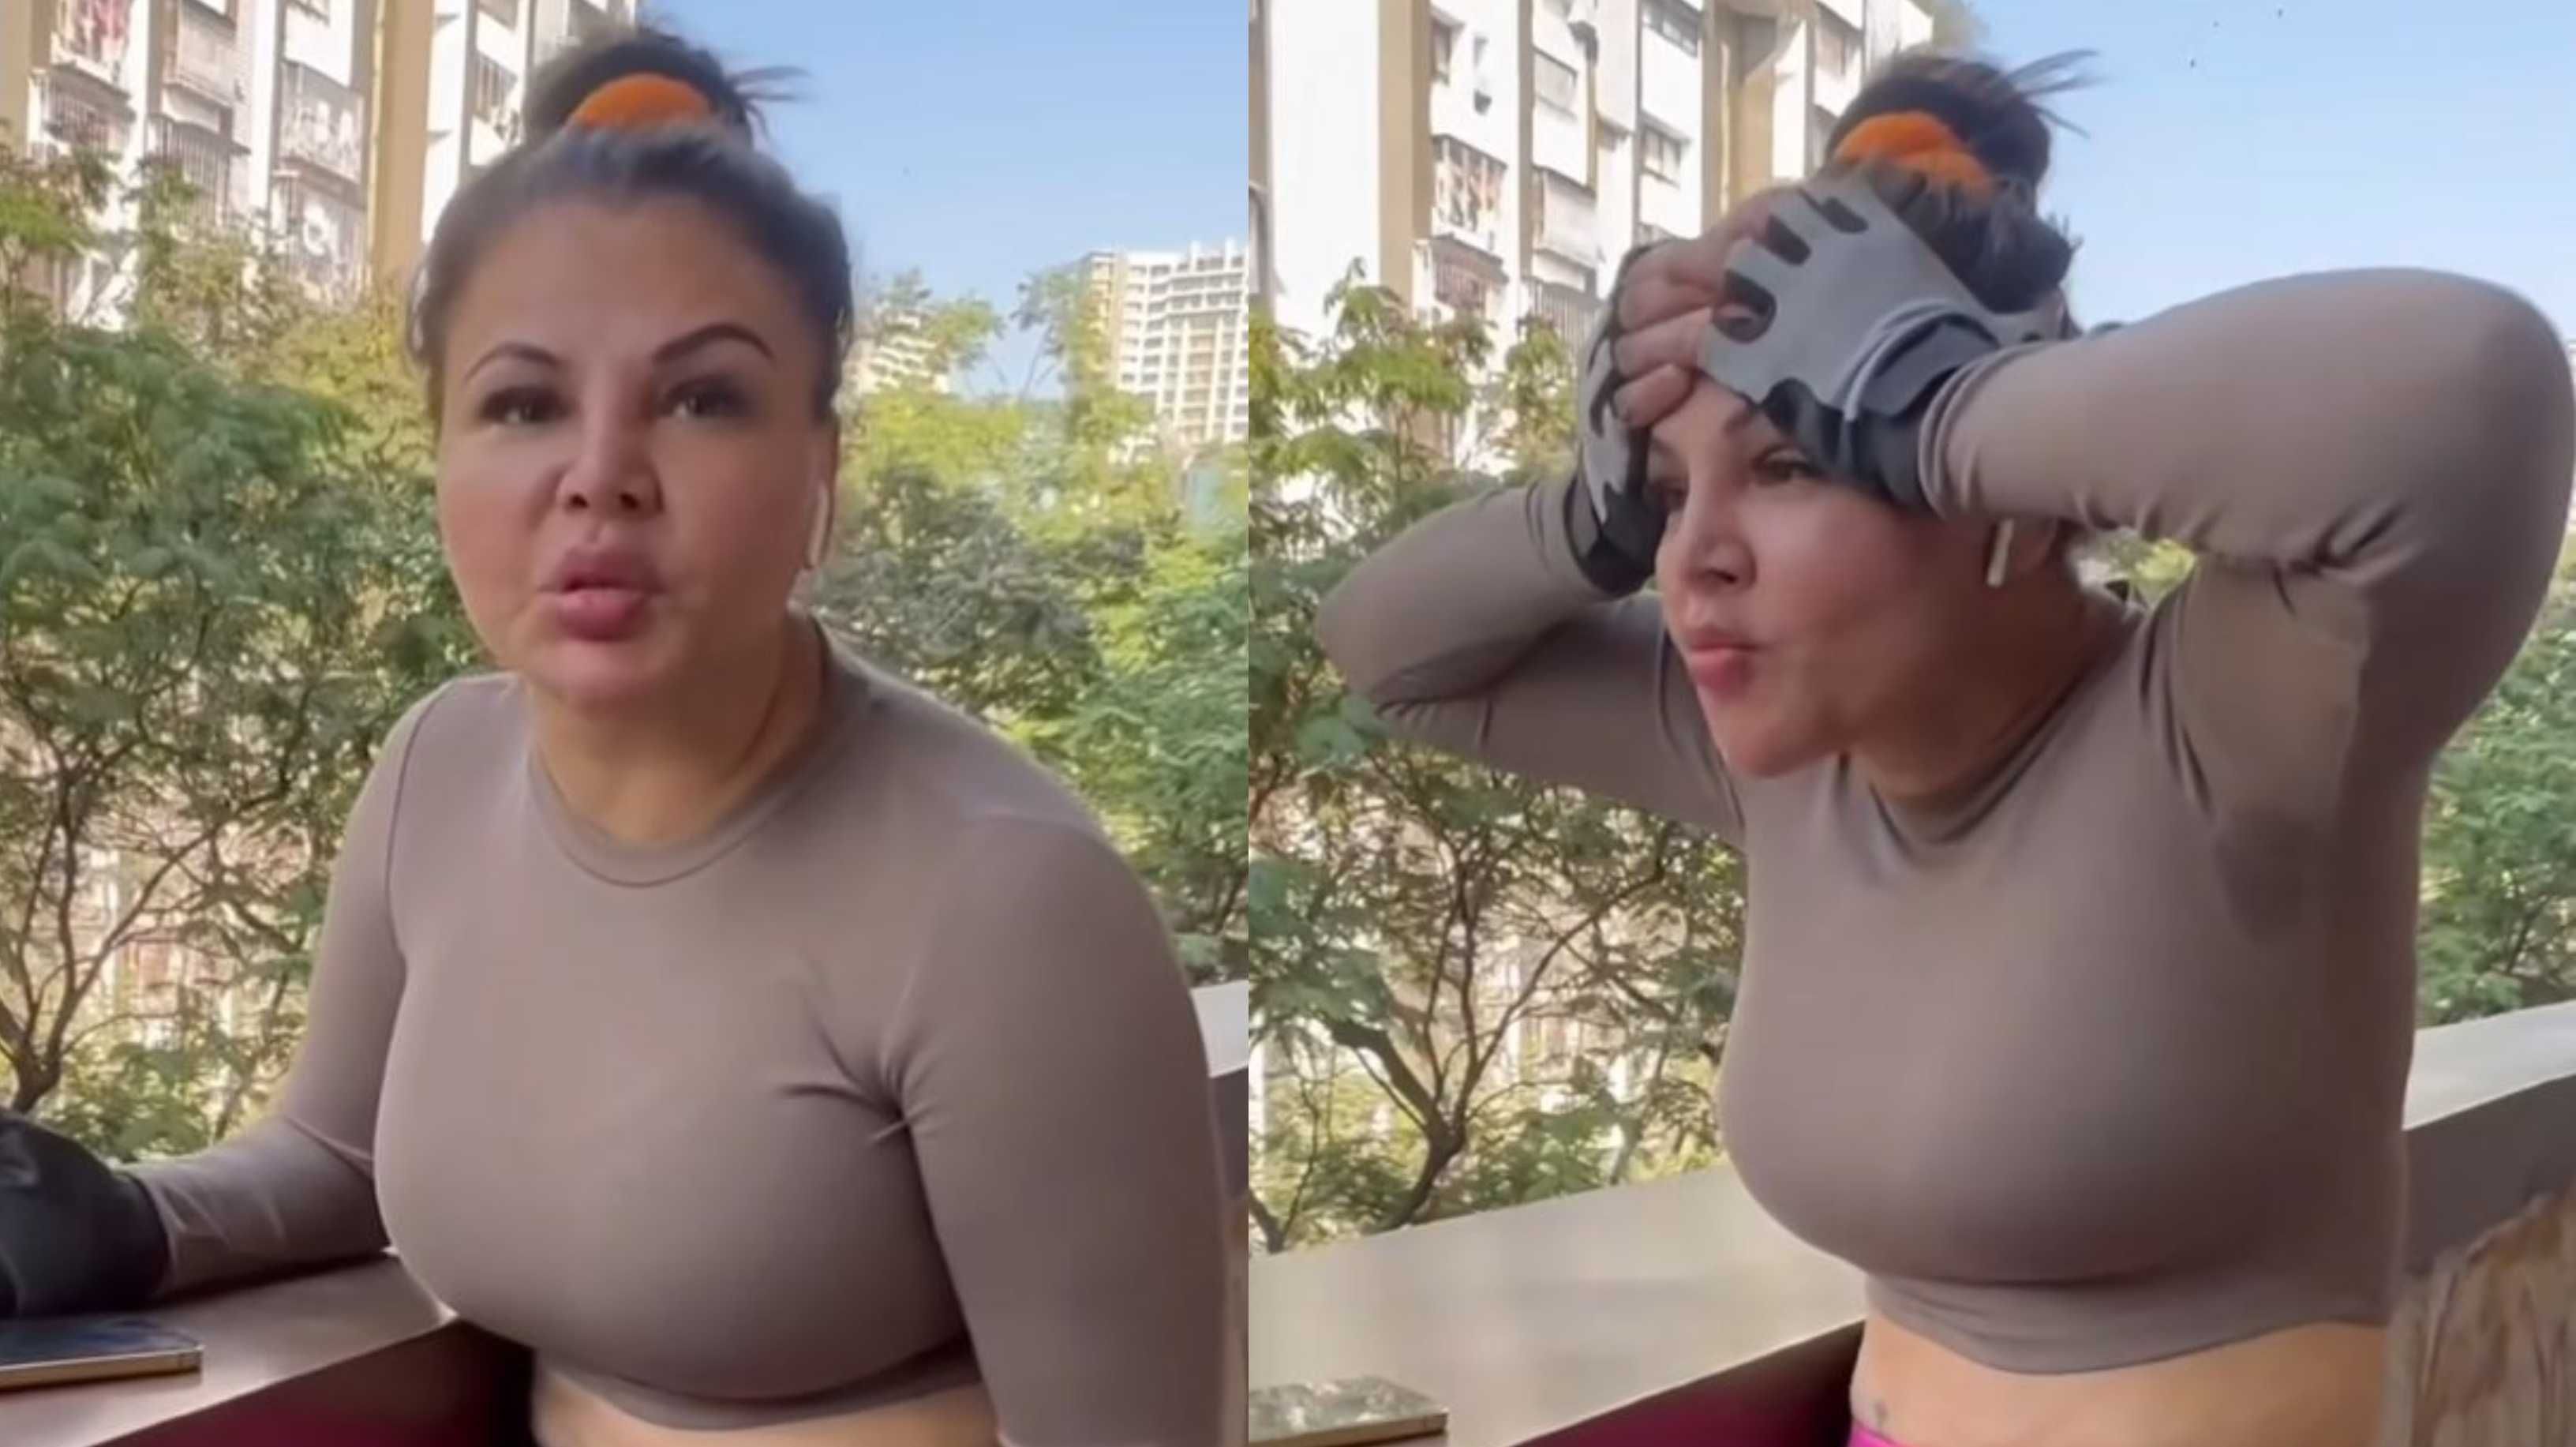 Rakhi Sawant Gets Angry At A Fan For Touching Her: “Aap Haath Mat